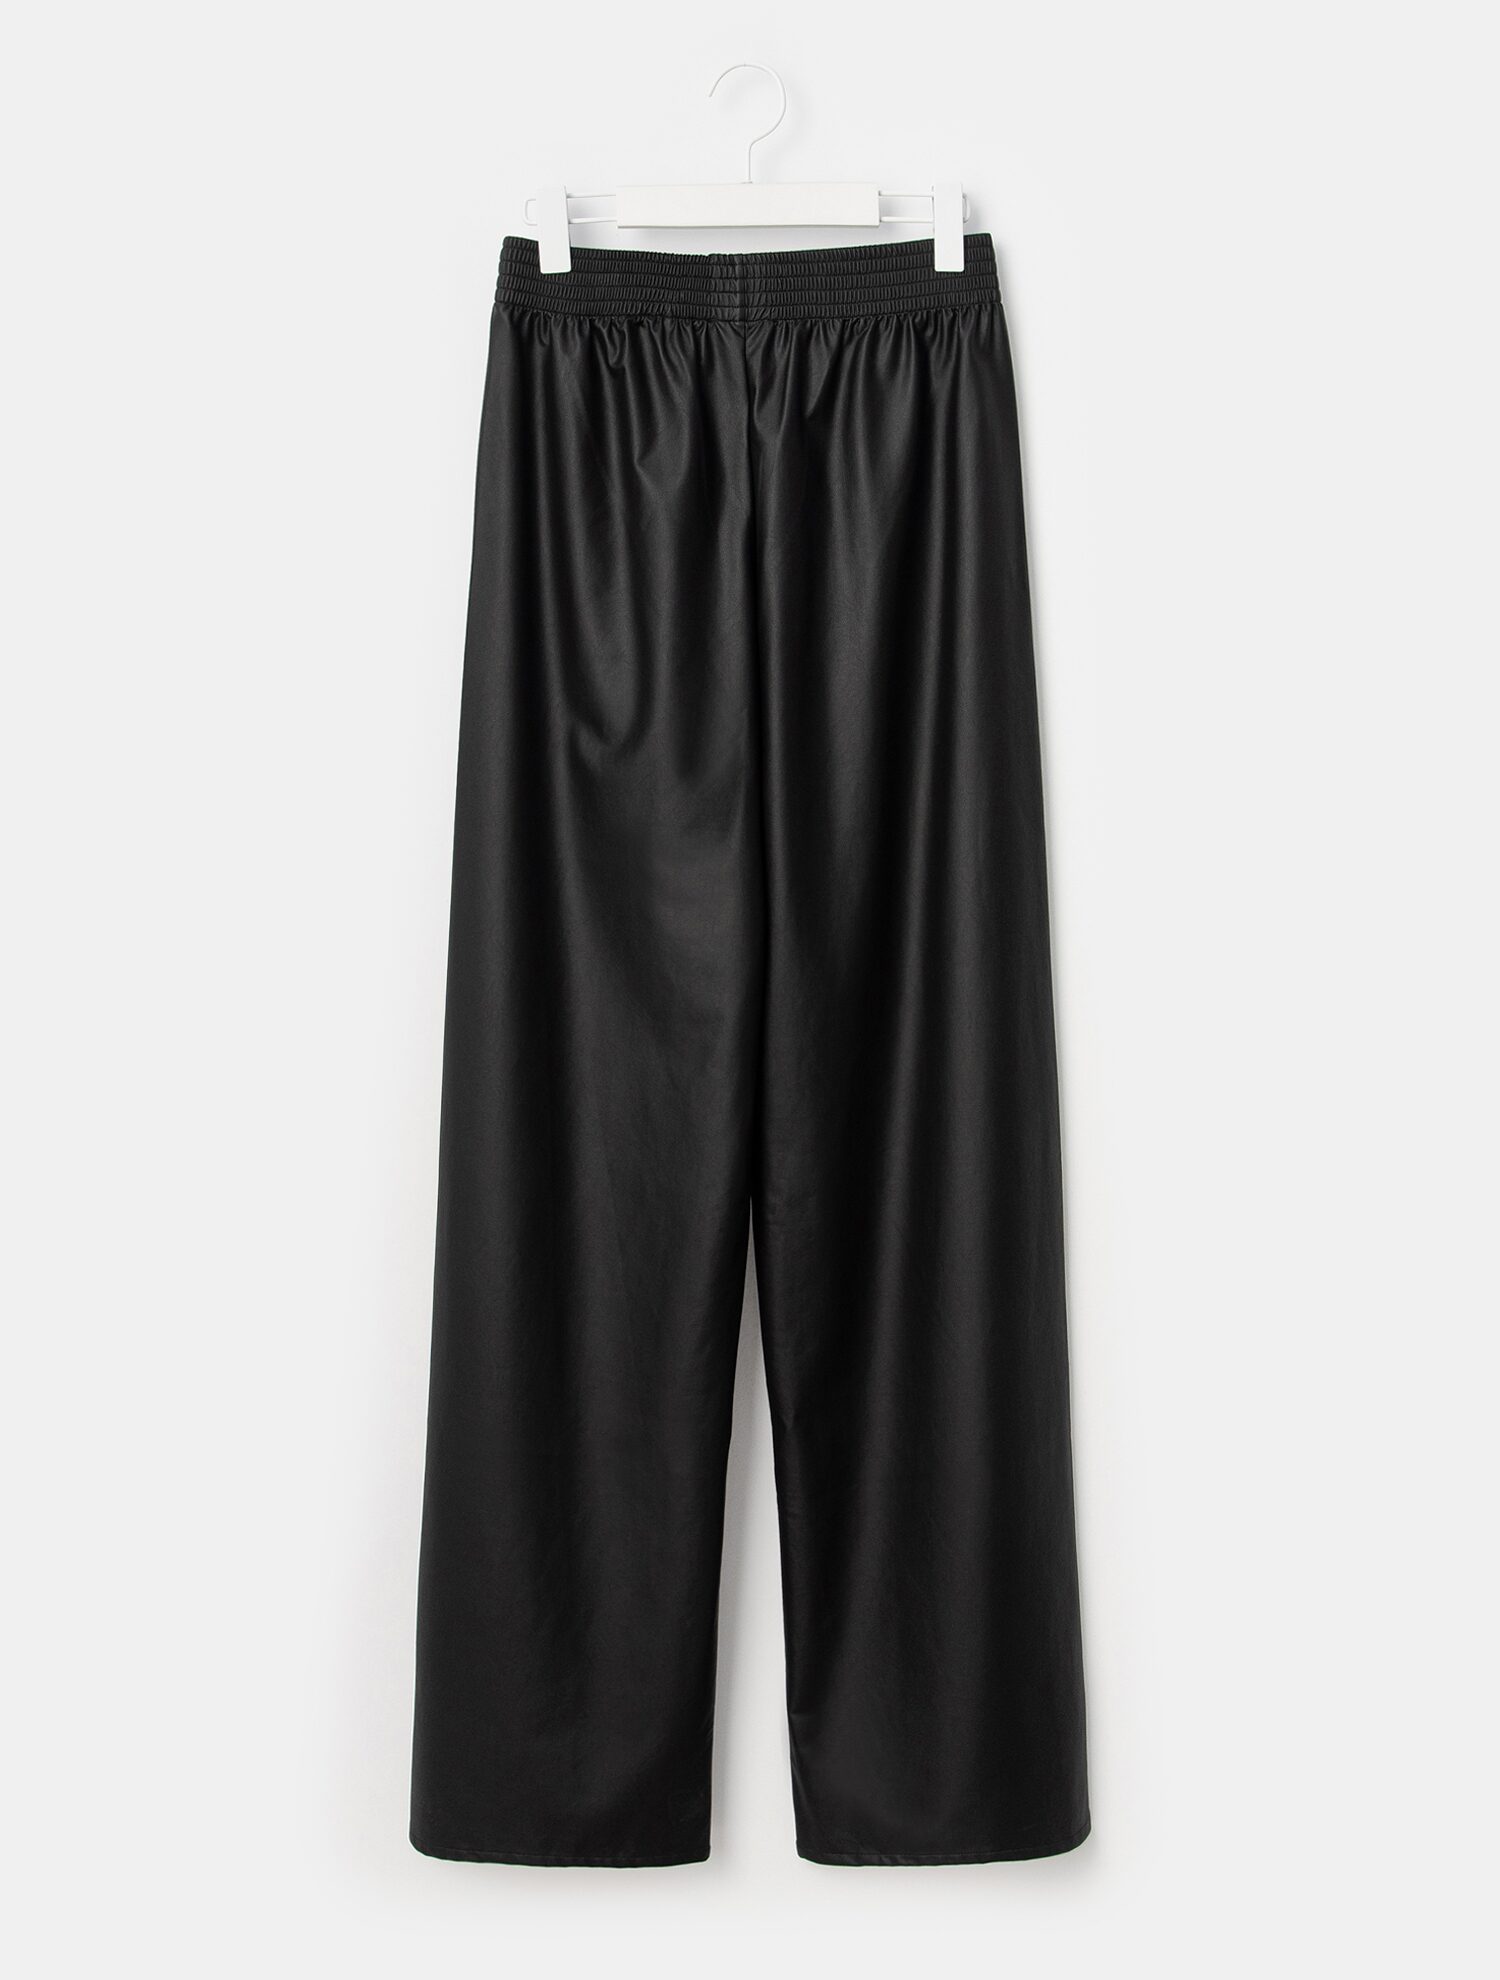 (MEN) RAF SIMONS ARCHIVE REDUX Track pants in fake leather 